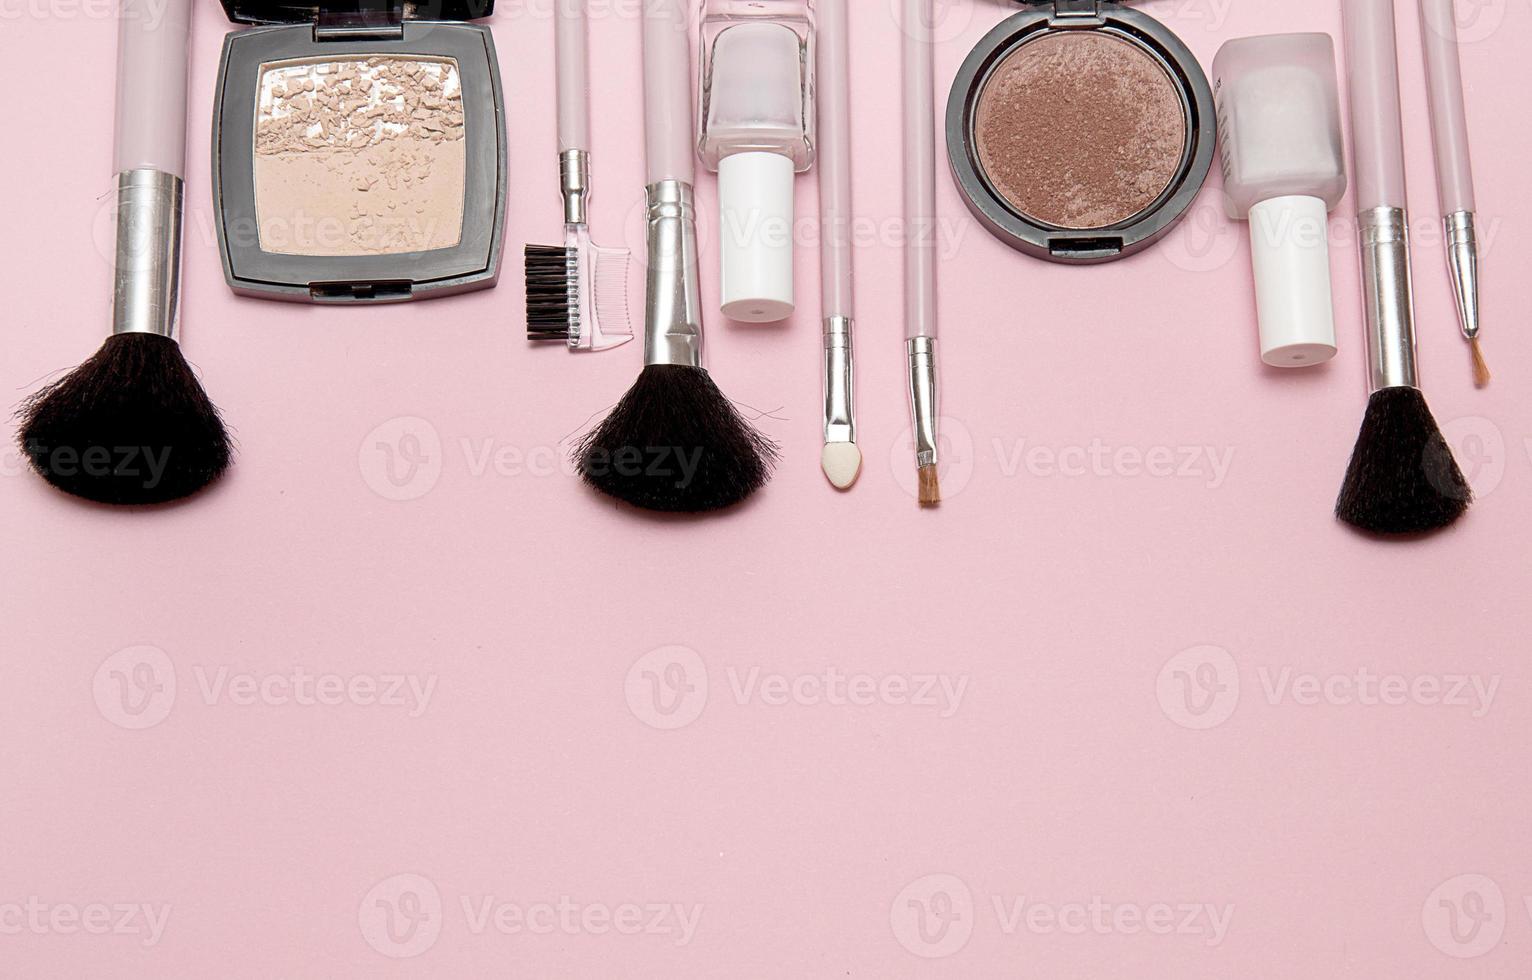 Cosmetic brushes, powder, blush, nail polish on pink background with place for text below photo